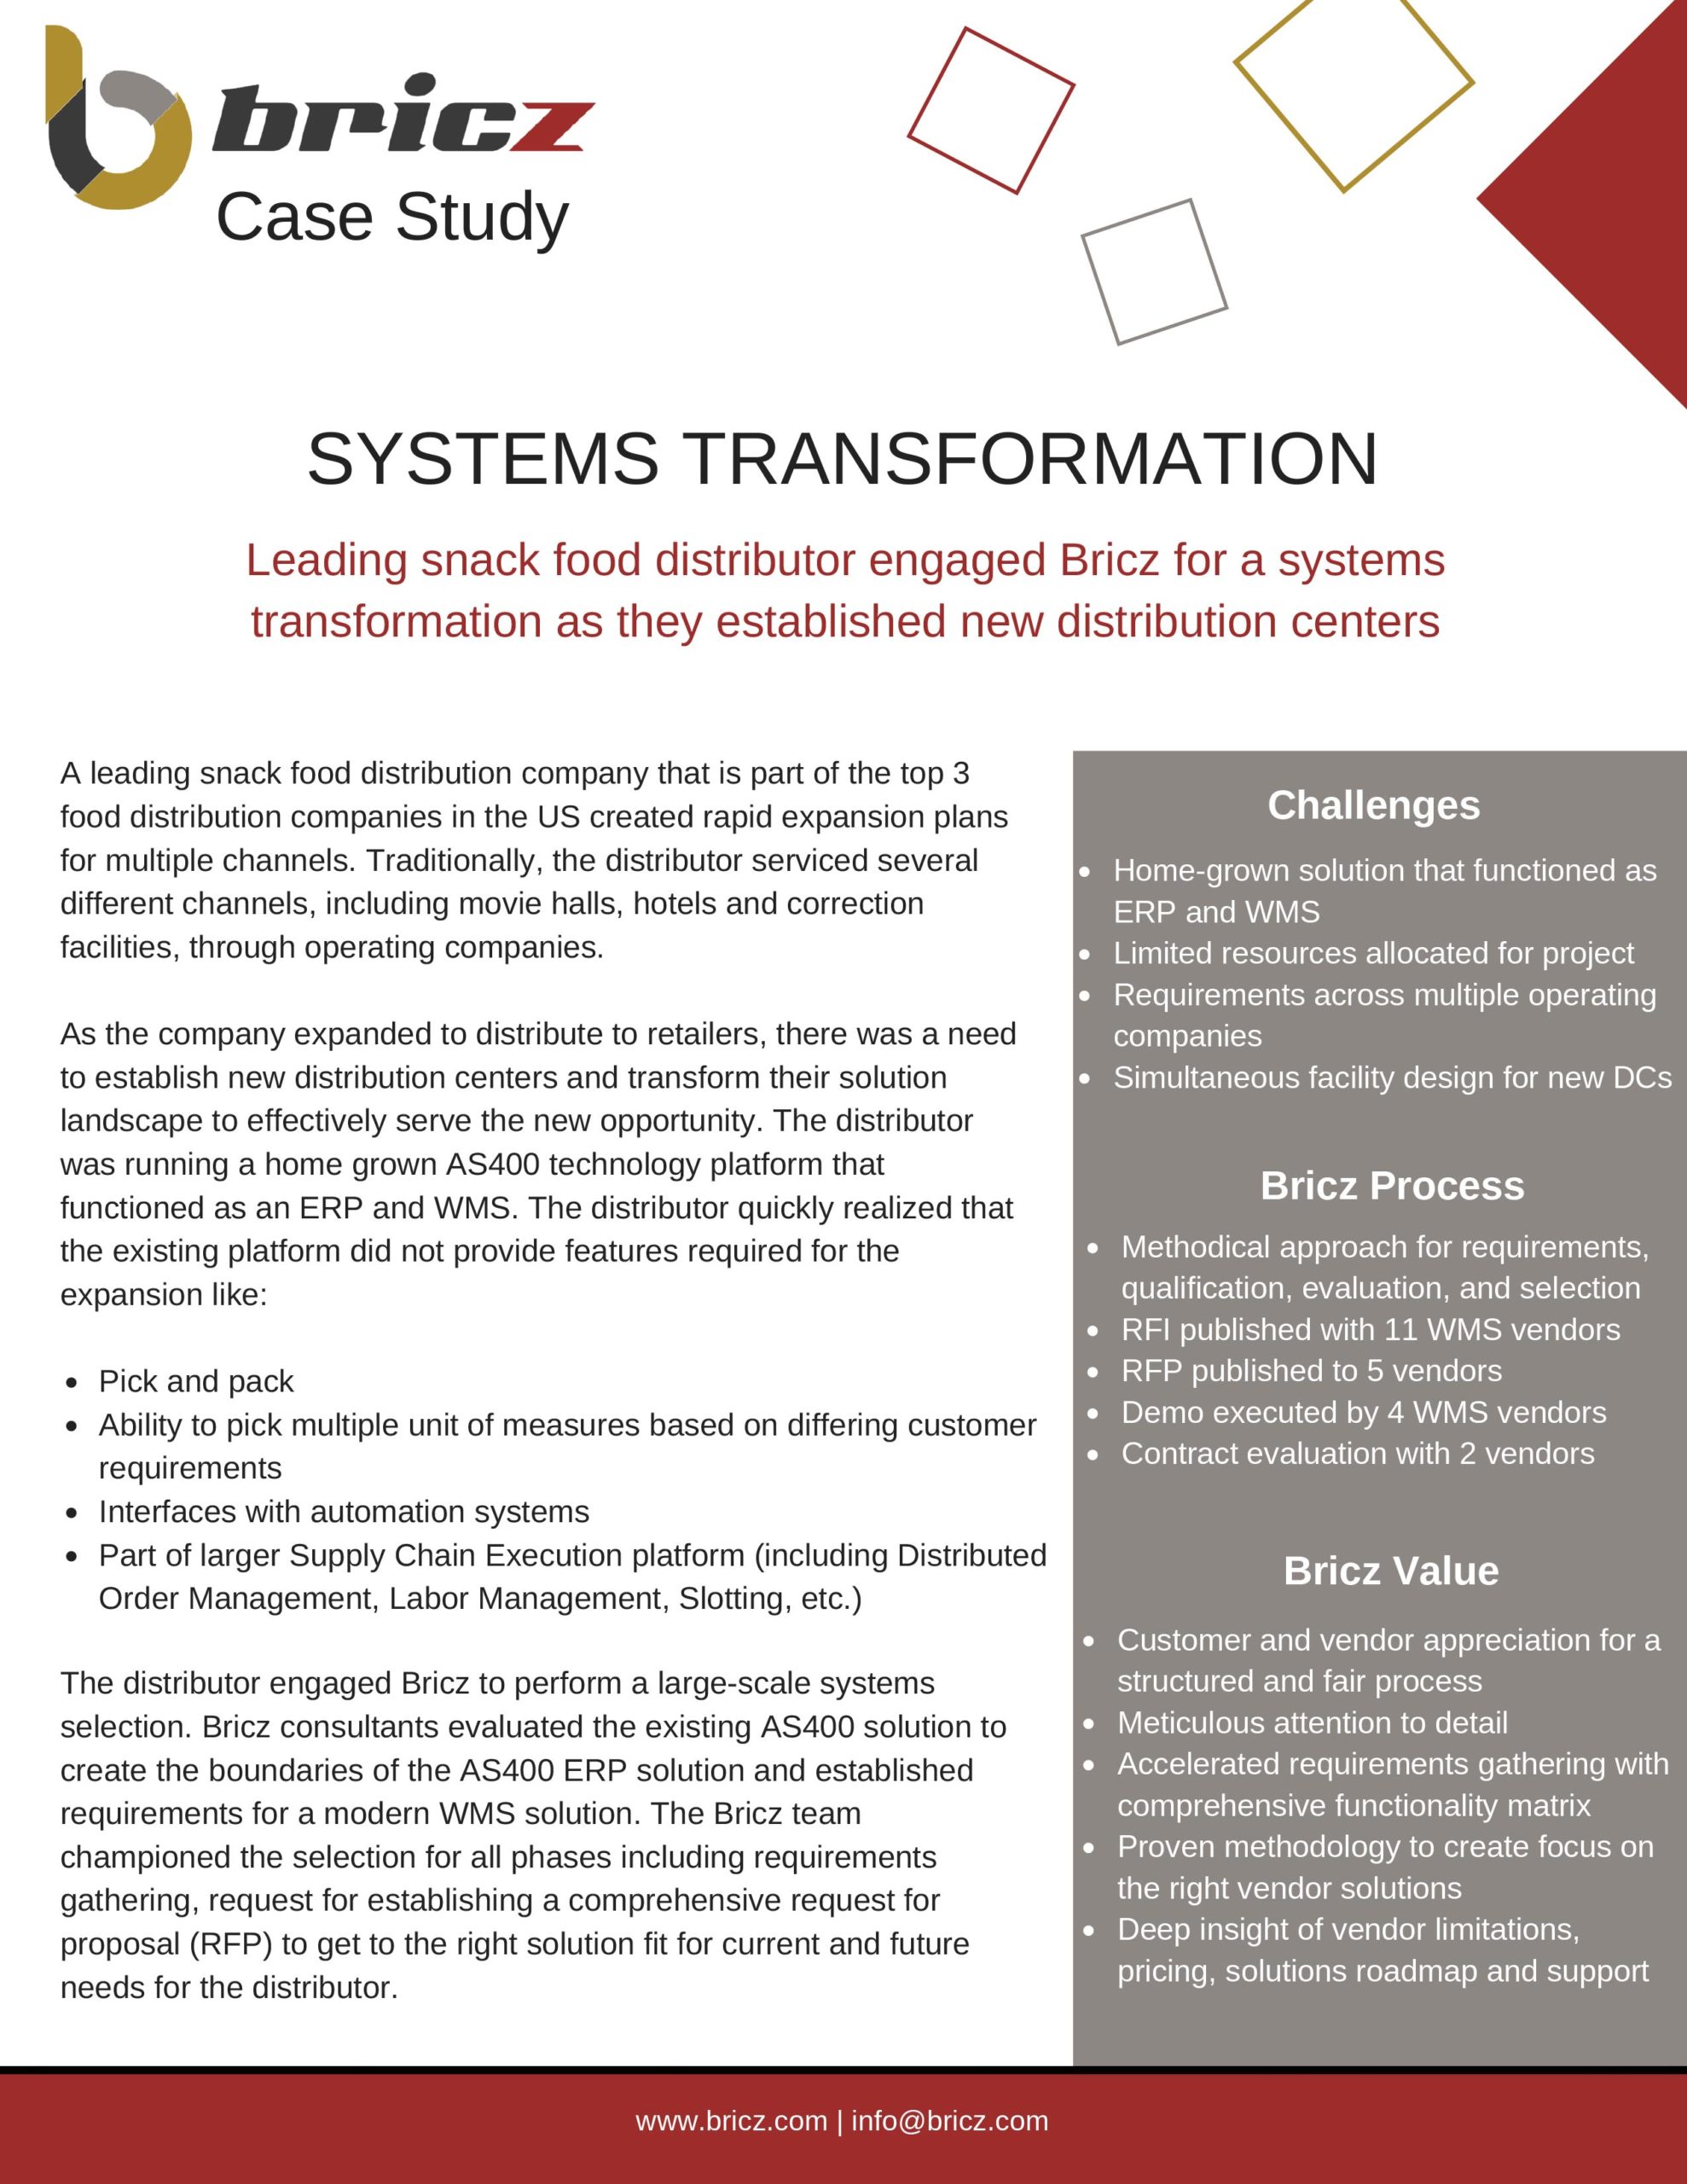 Systems Transformation